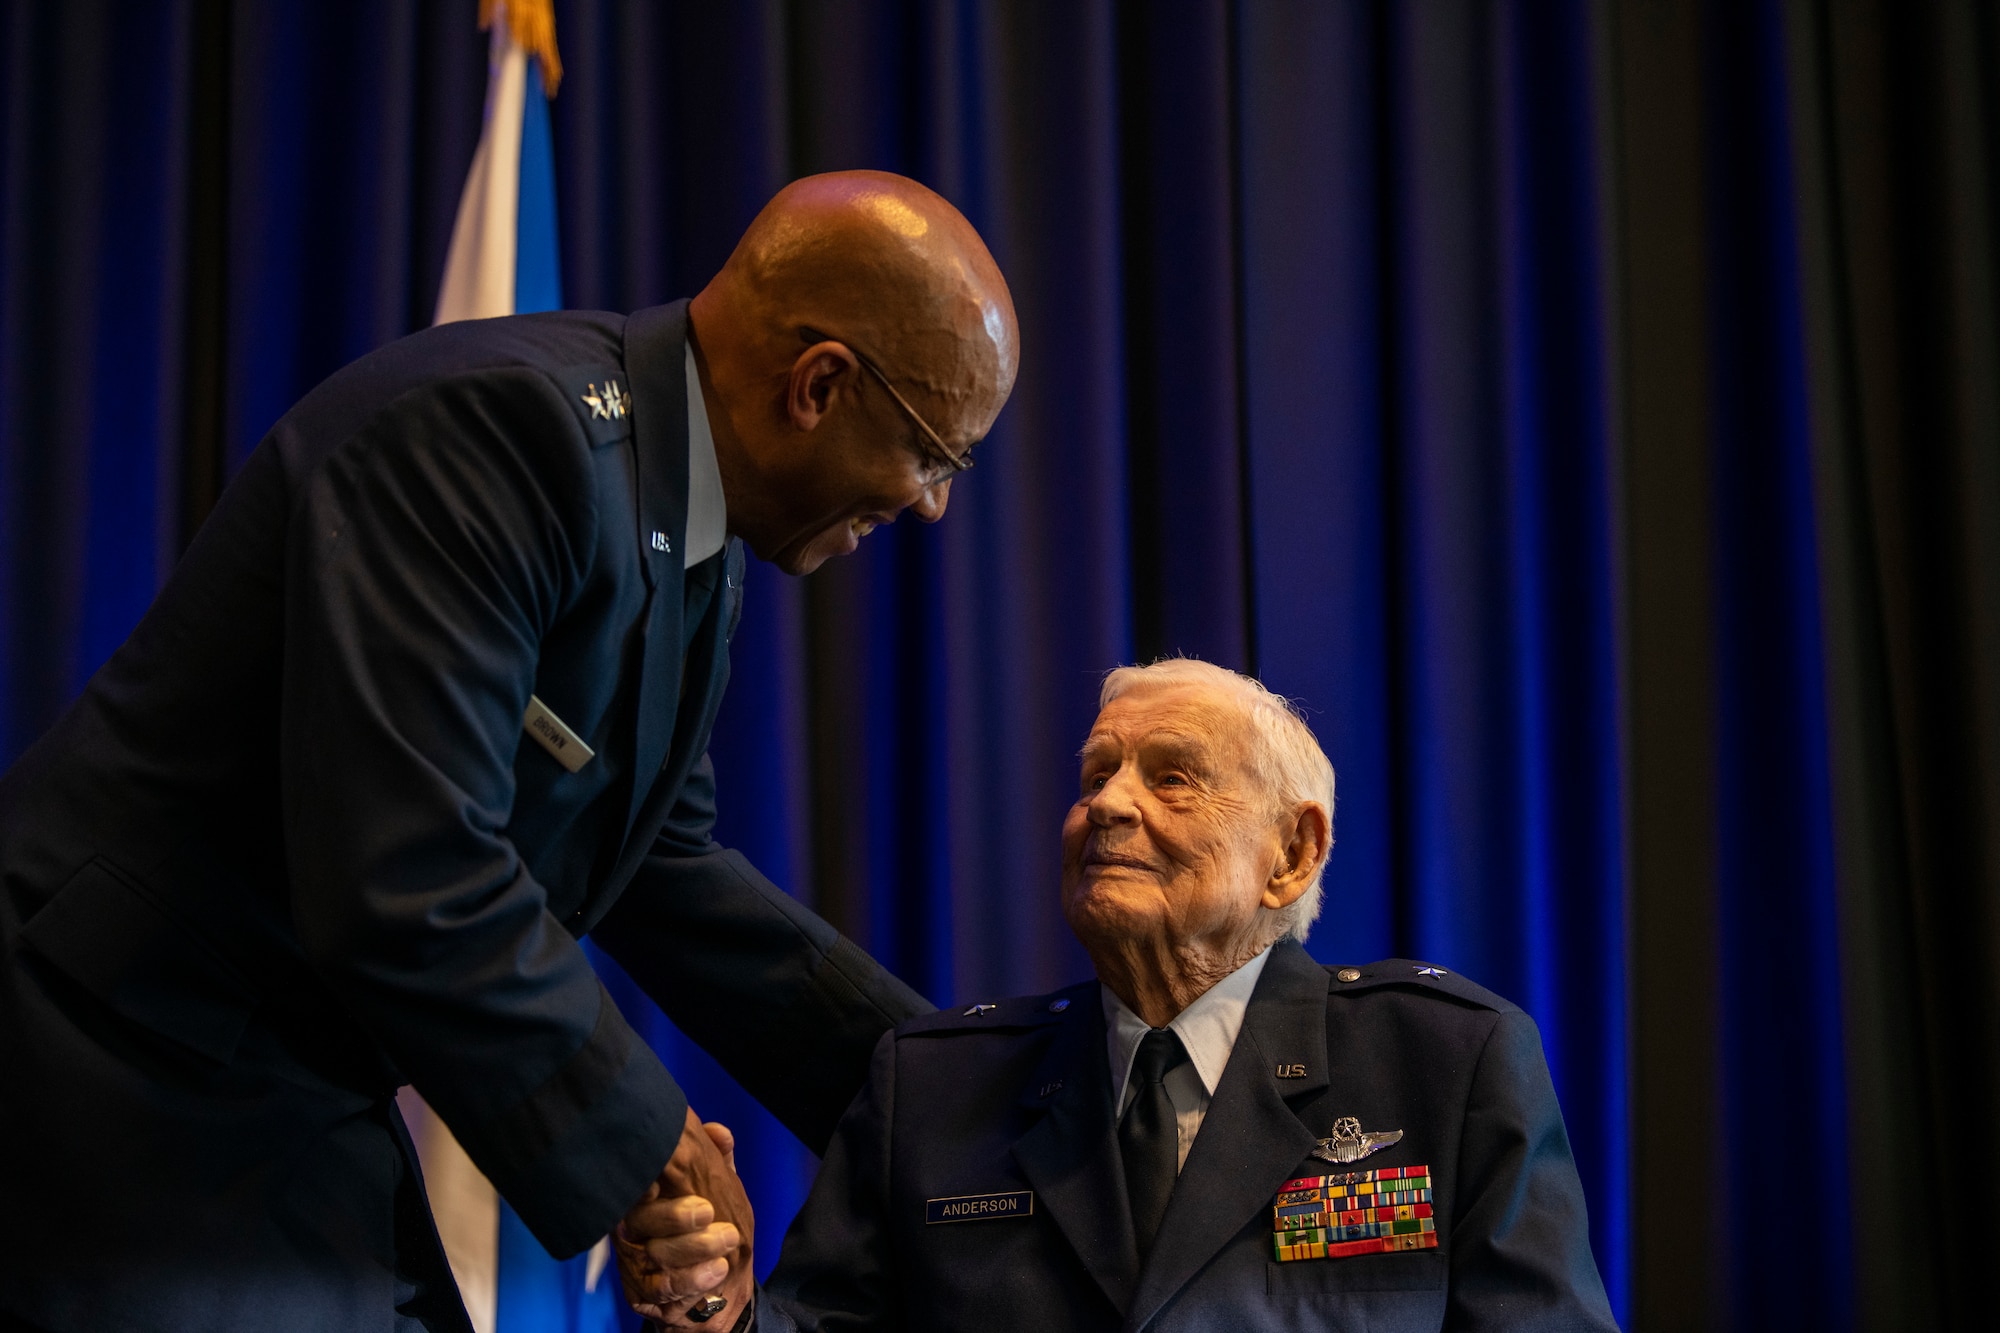 A high-ranking military leader shakes the hand of an elderly man in uniform.